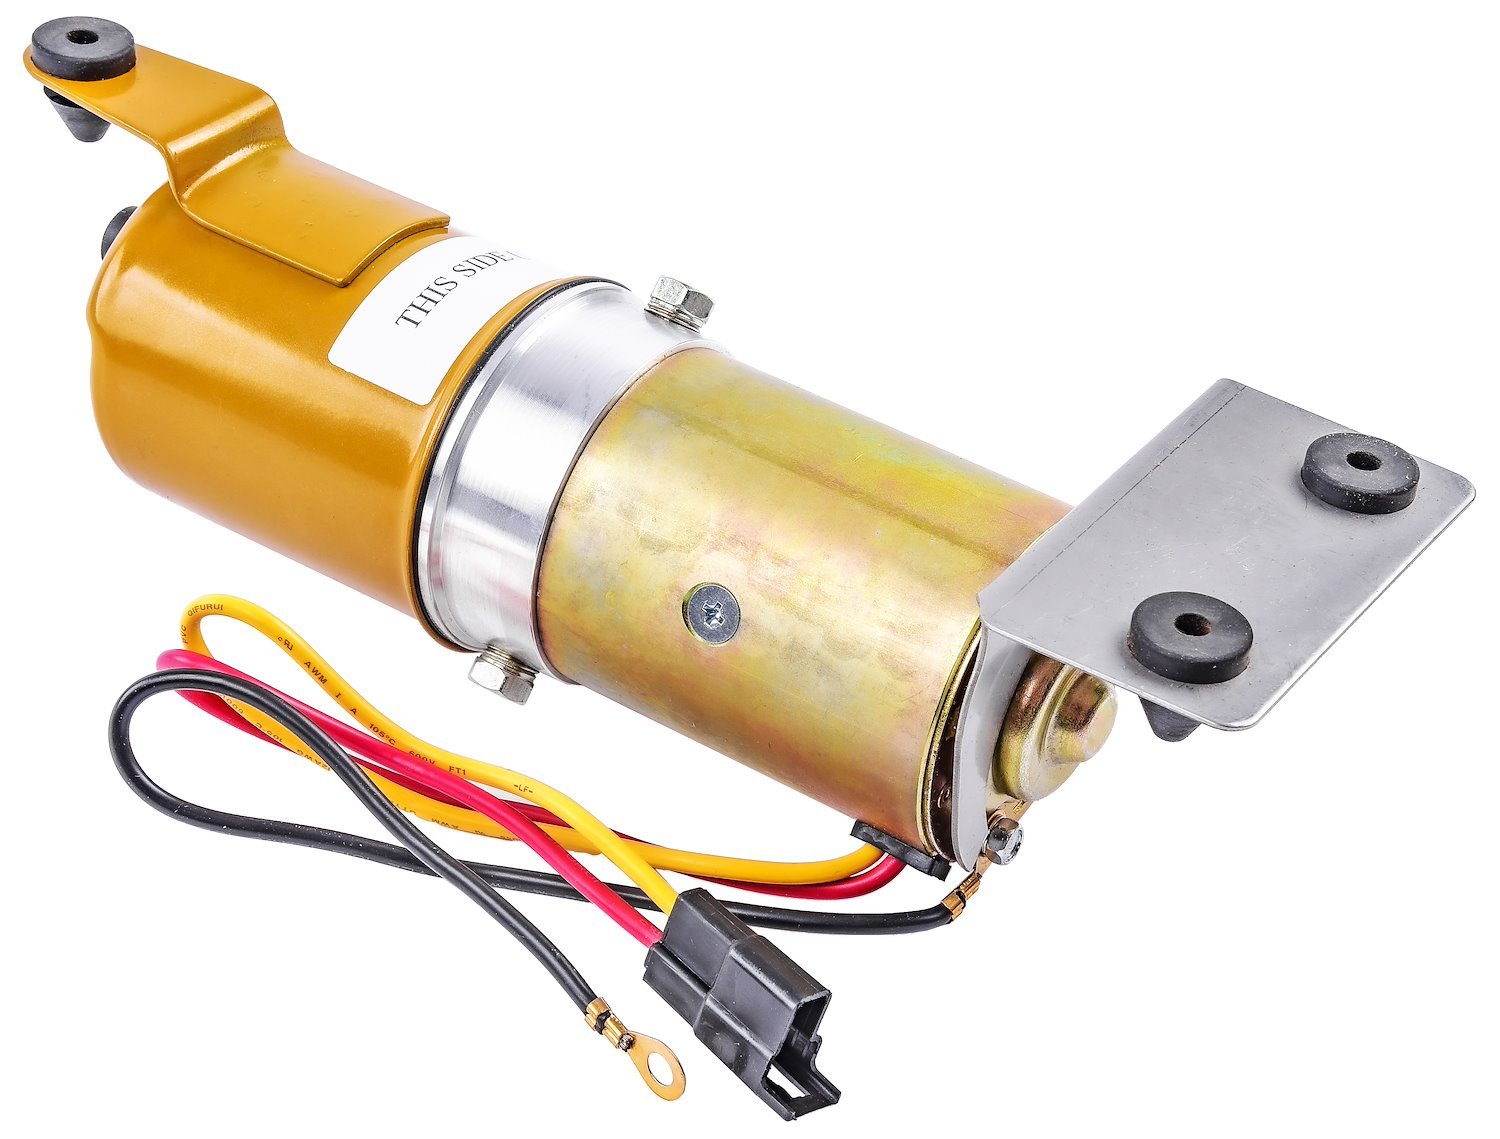 Convertible Top Pump and Motor Assembly Fits Select 1965-1970 GM Full-Size Models [OEM Plug]